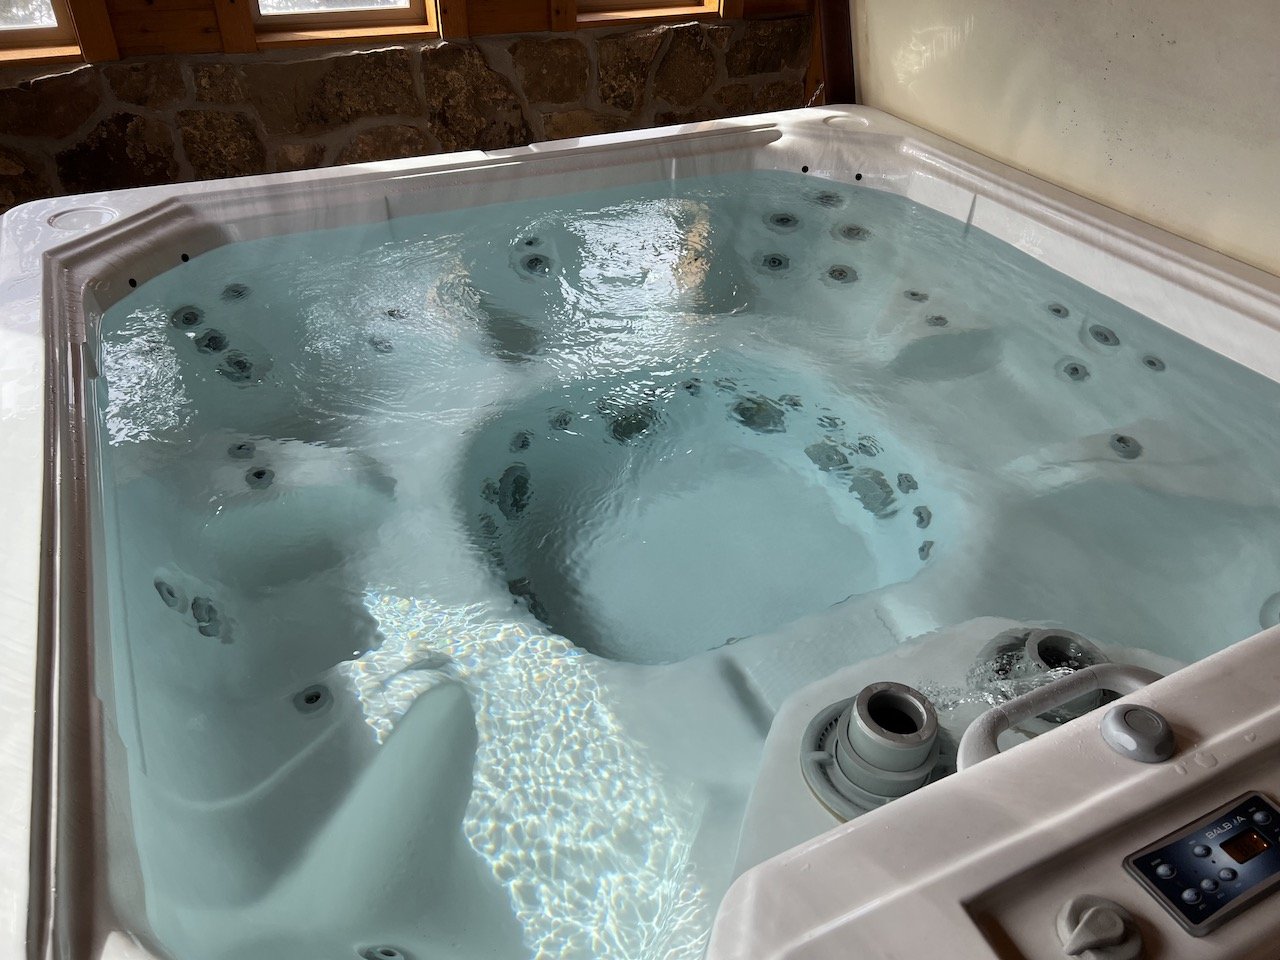 Properly maintained hot tub in rental house located in Alma, Colorado